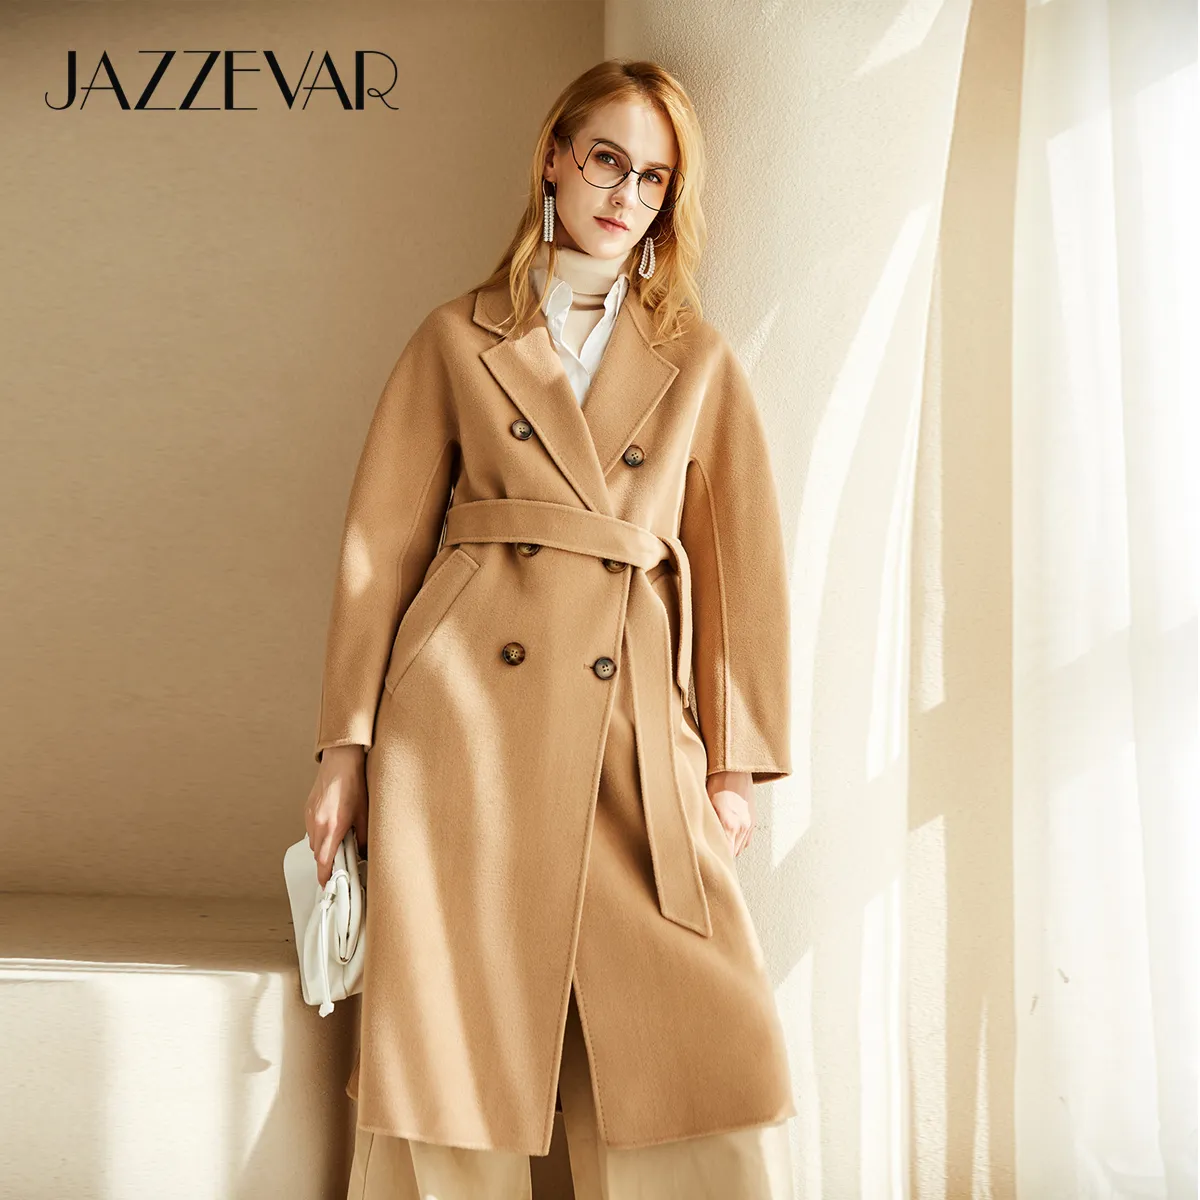 JAZZEVAR Atumn Winter New Arrival Women Hand-sewn Double breasted Coat High Quality Double-faced Wool Outerwear For Lady 200923